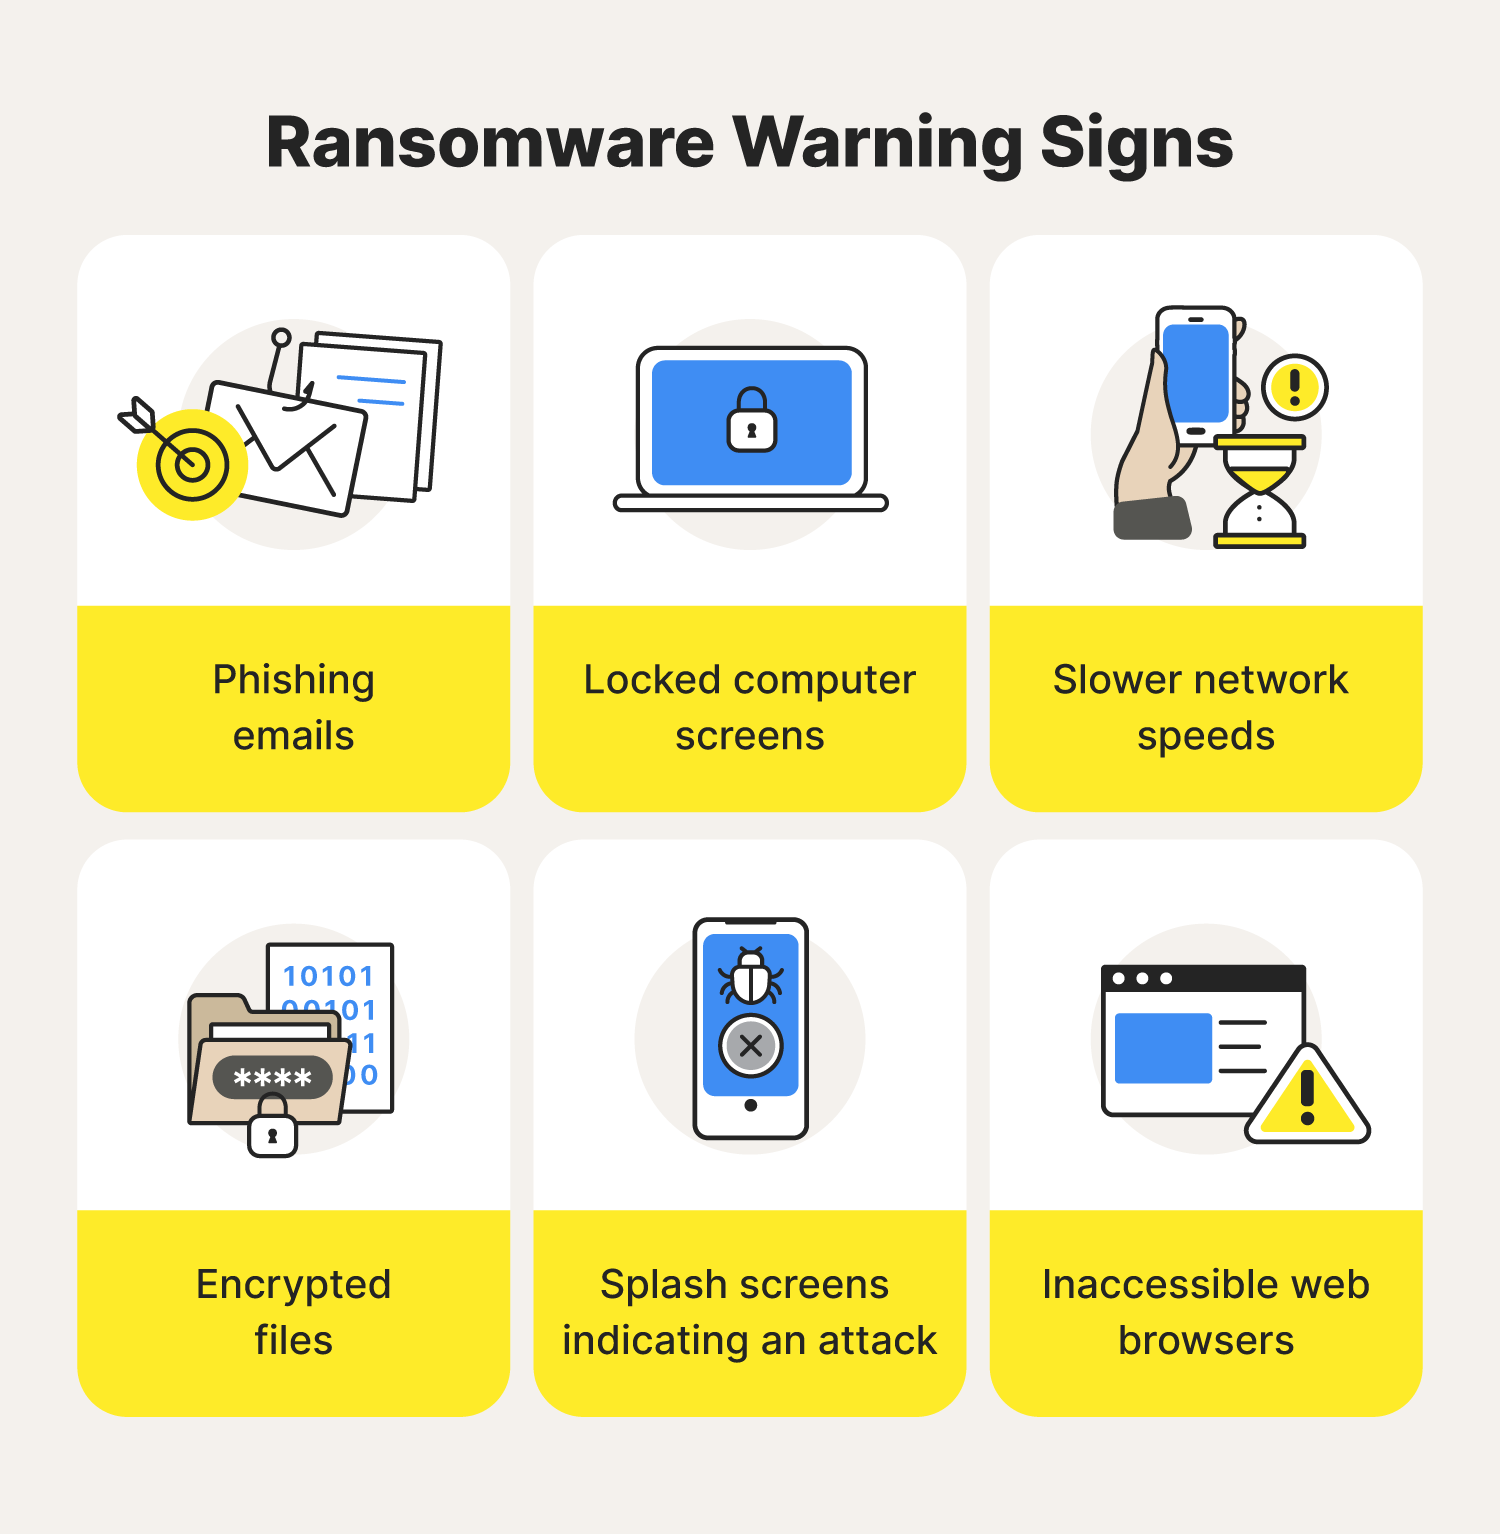 Six illustrations highlight common ransomware warning signs for those learning how to avoid ransomware online. 